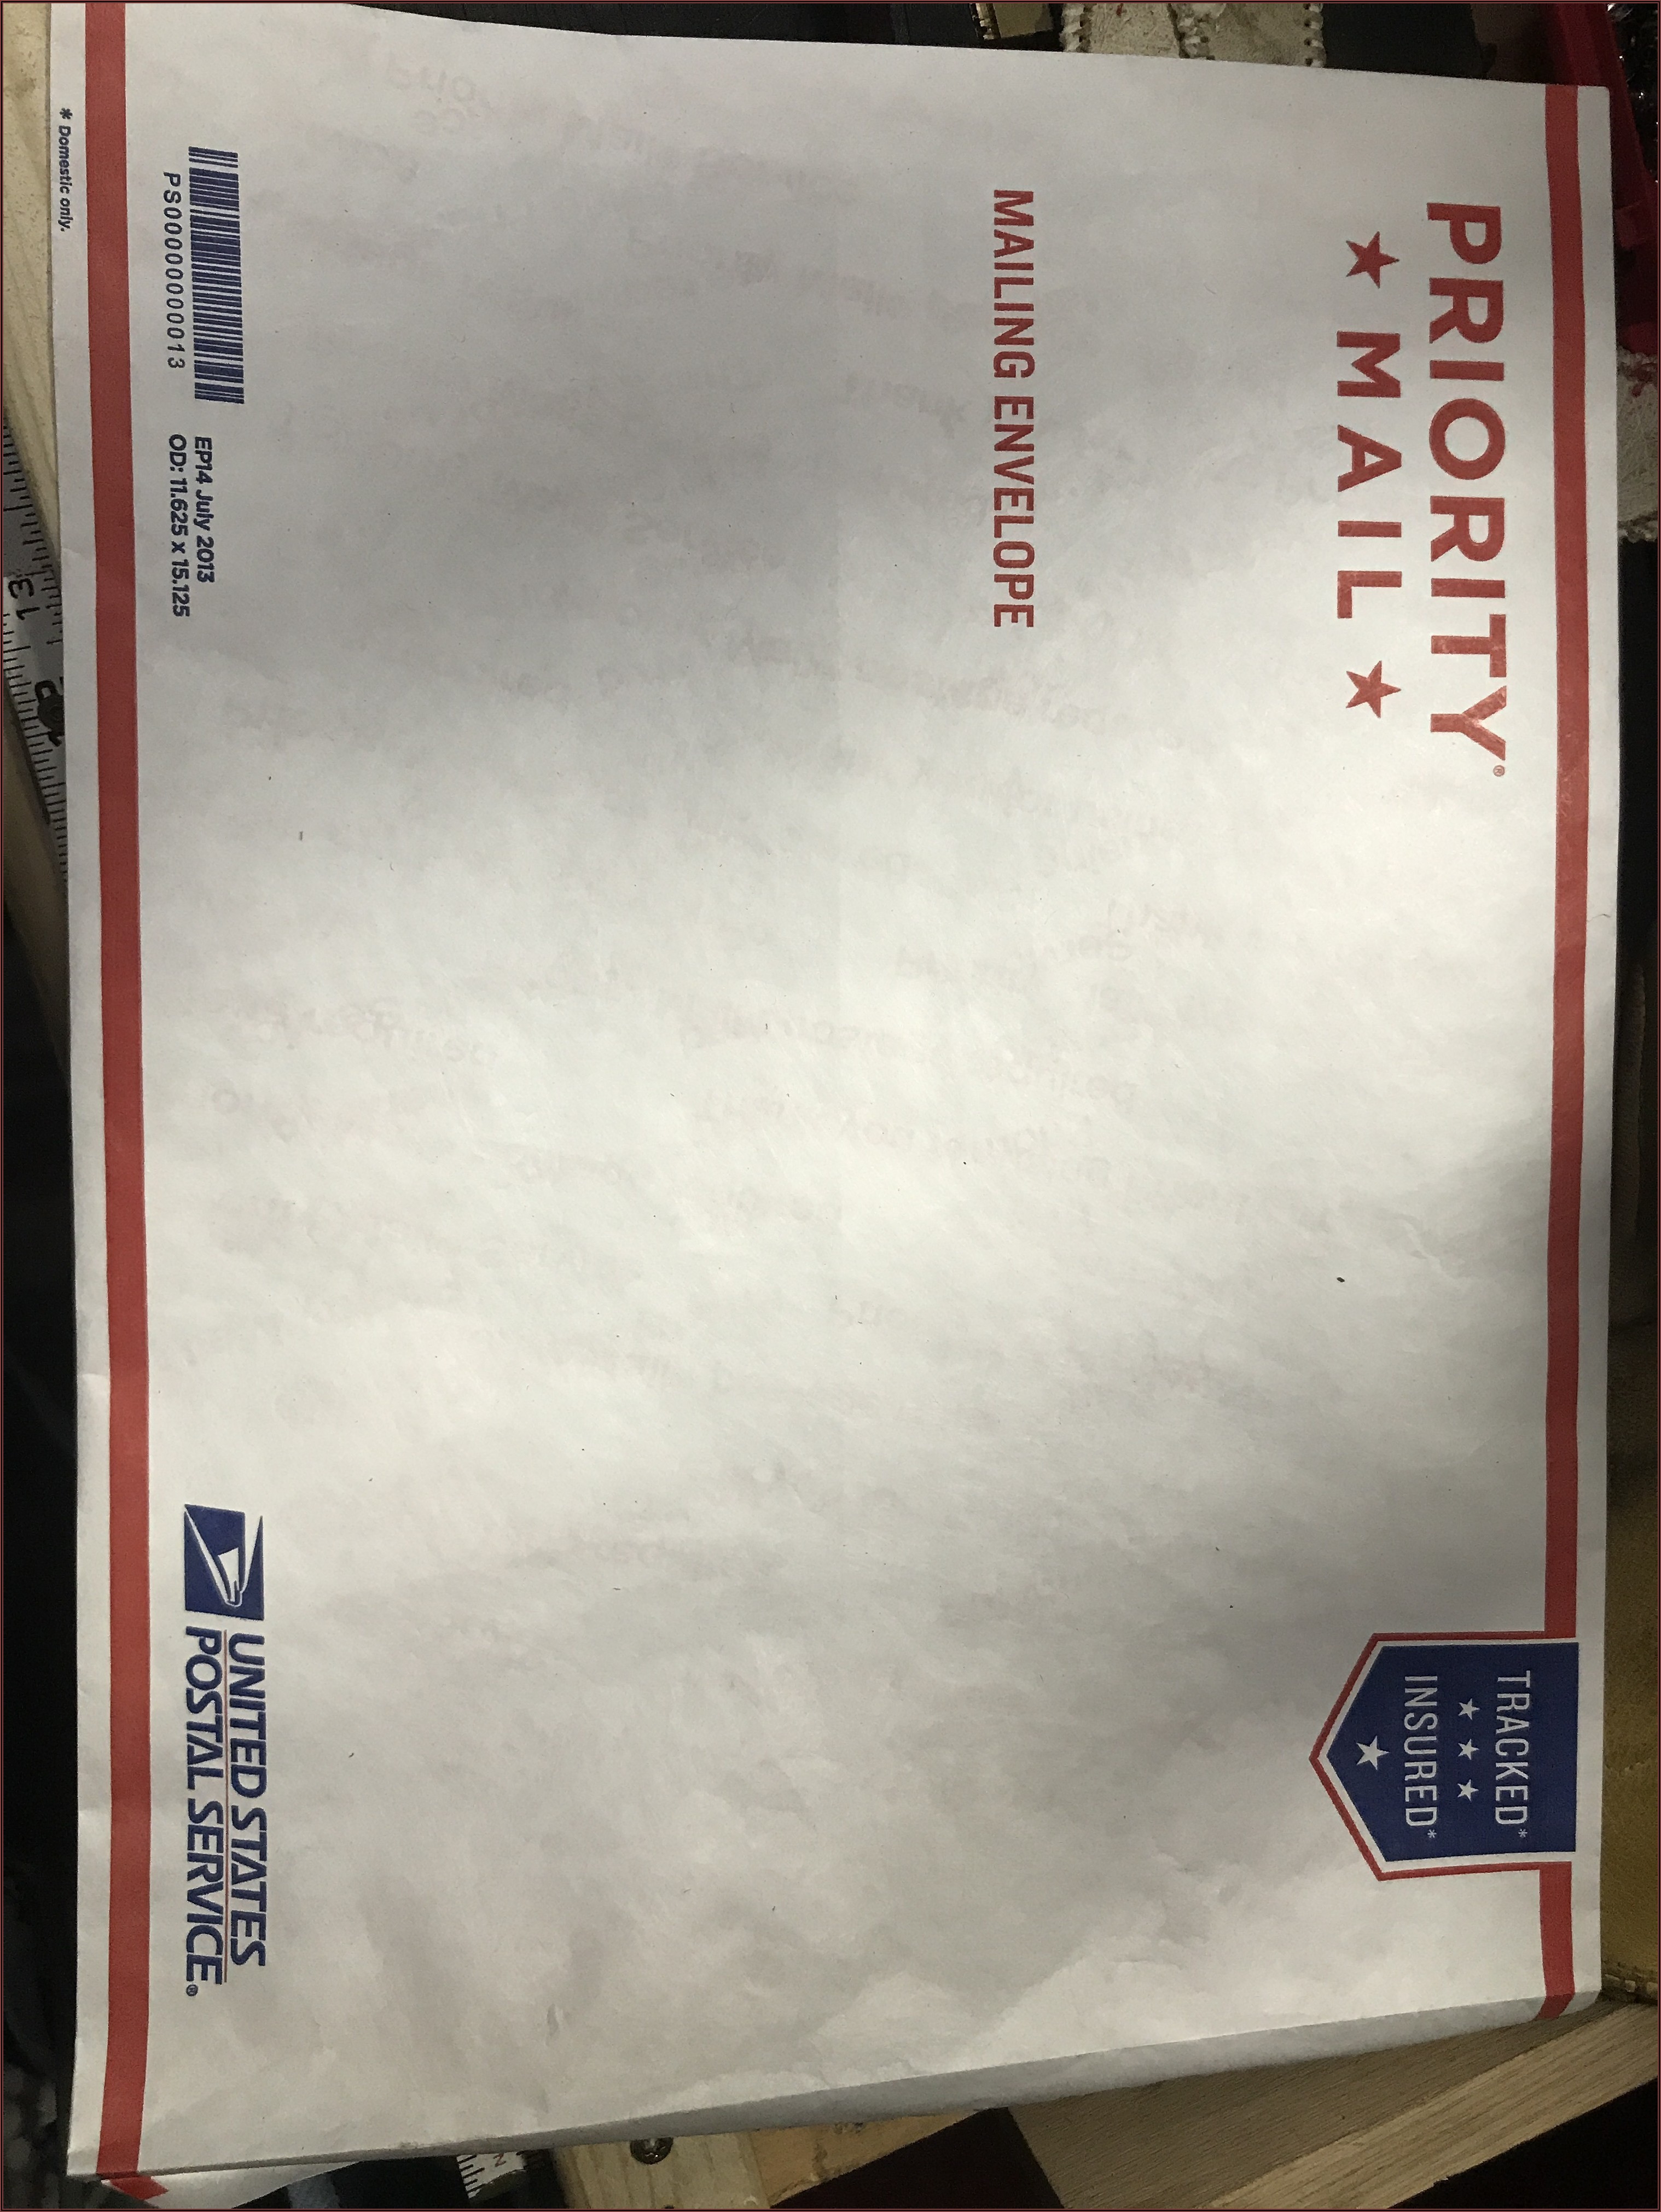 Usps Priority Mail Flat Rate Envelope 11.625 X 15.125